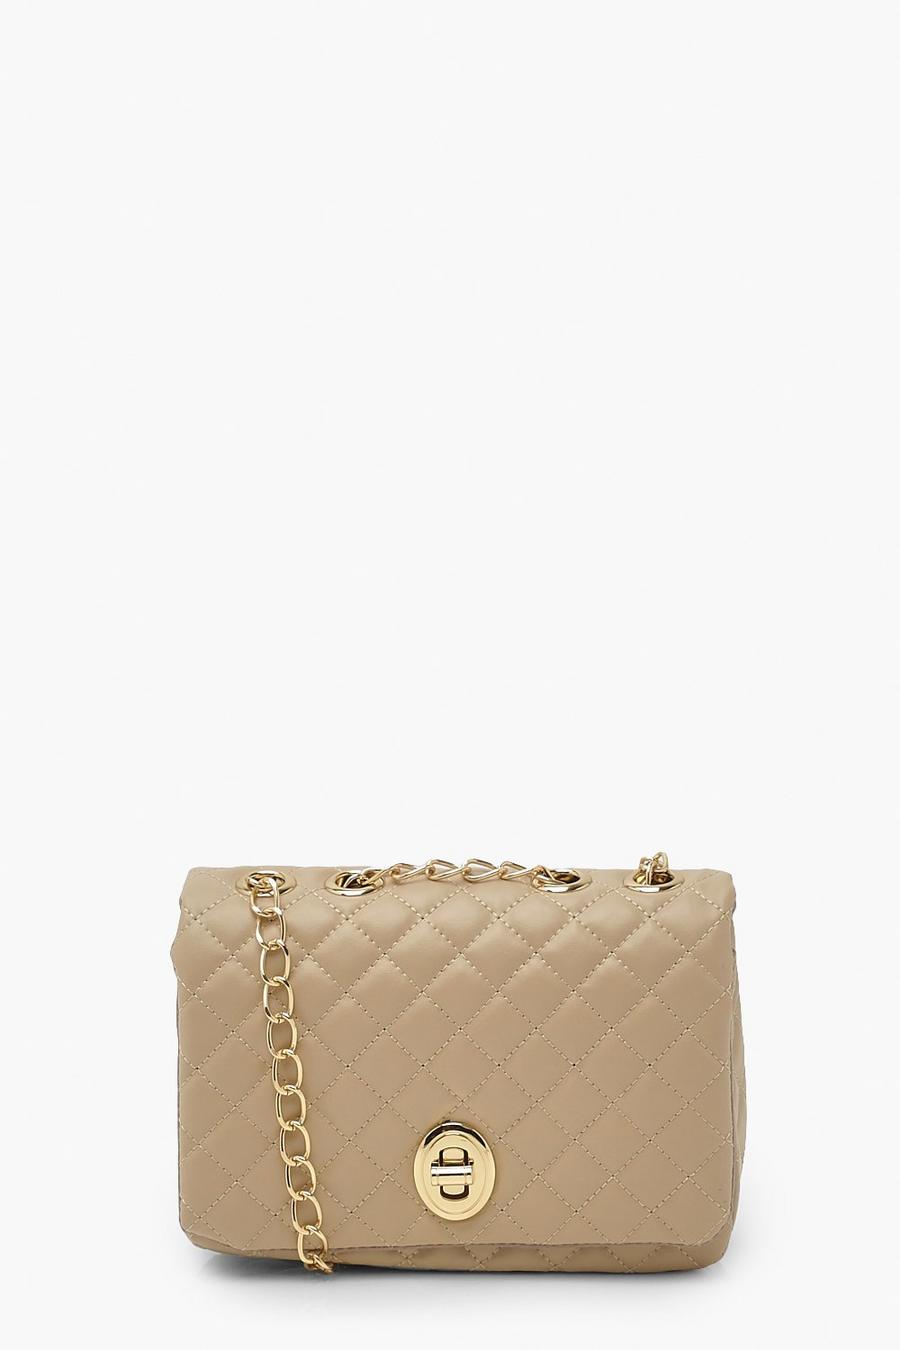 boohoo Quilted Faux Leather Cross Body Chain Bag - White - One Size